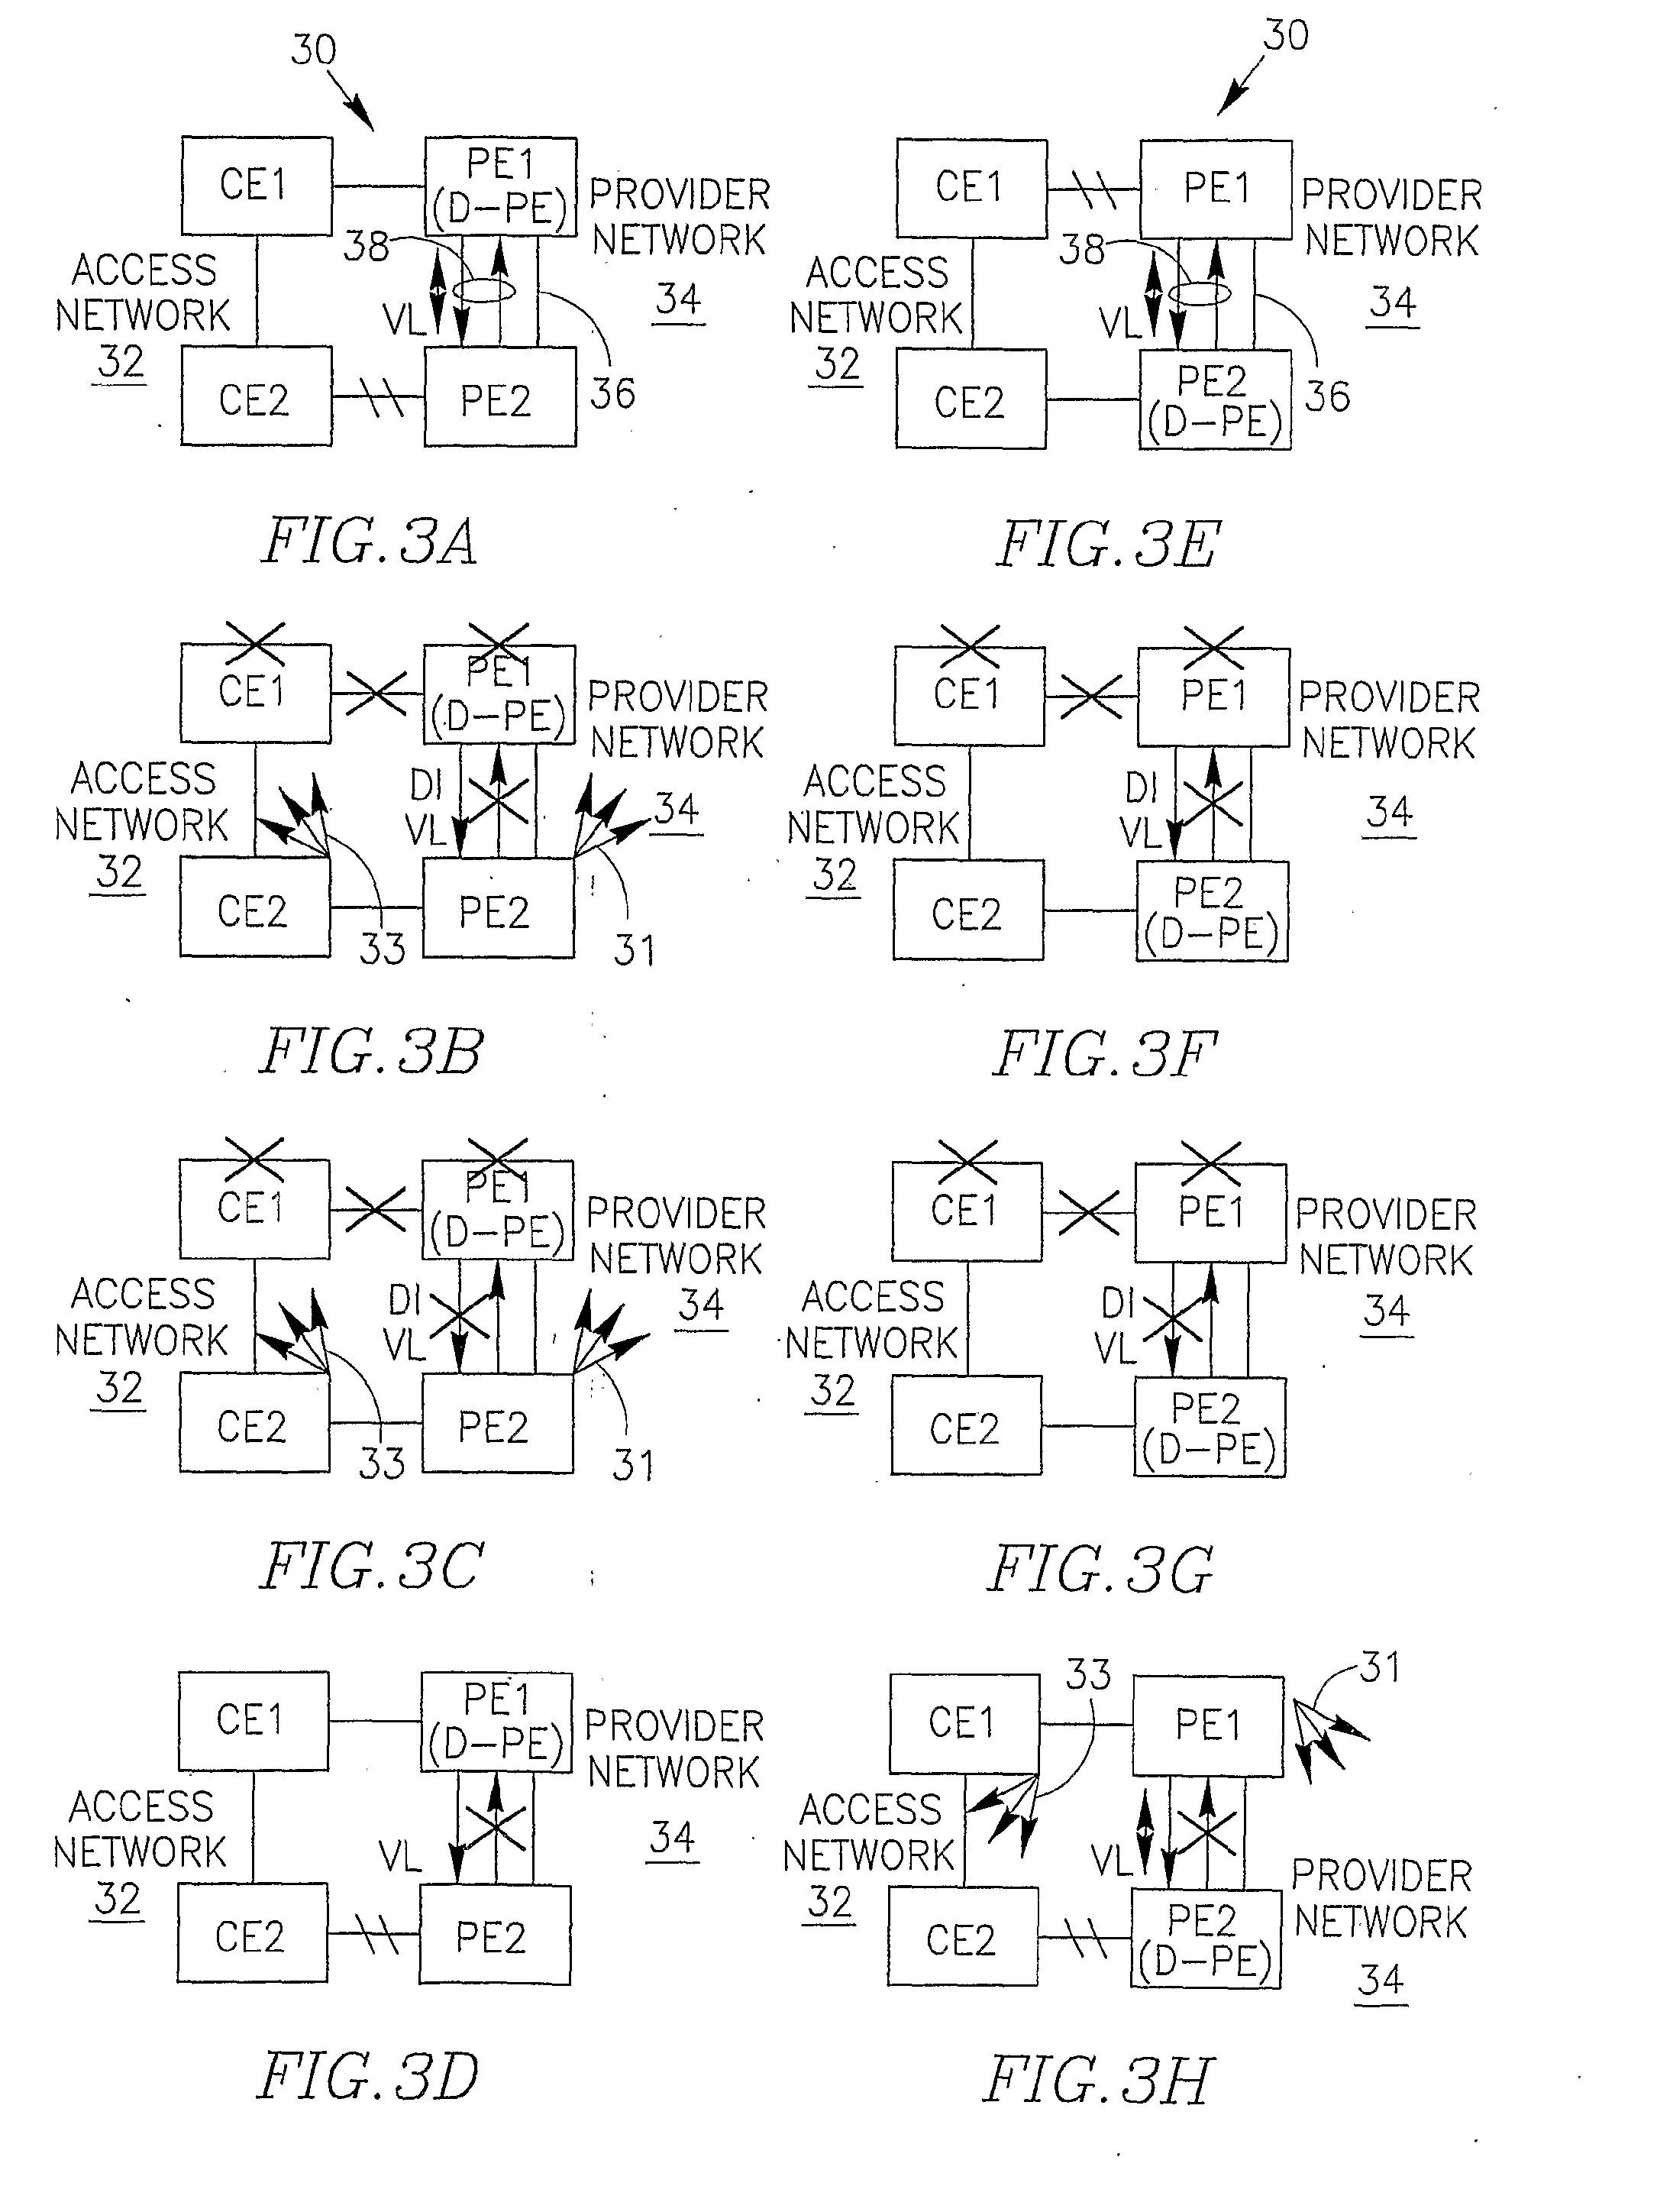 Technique for providing interconnection between communication networks